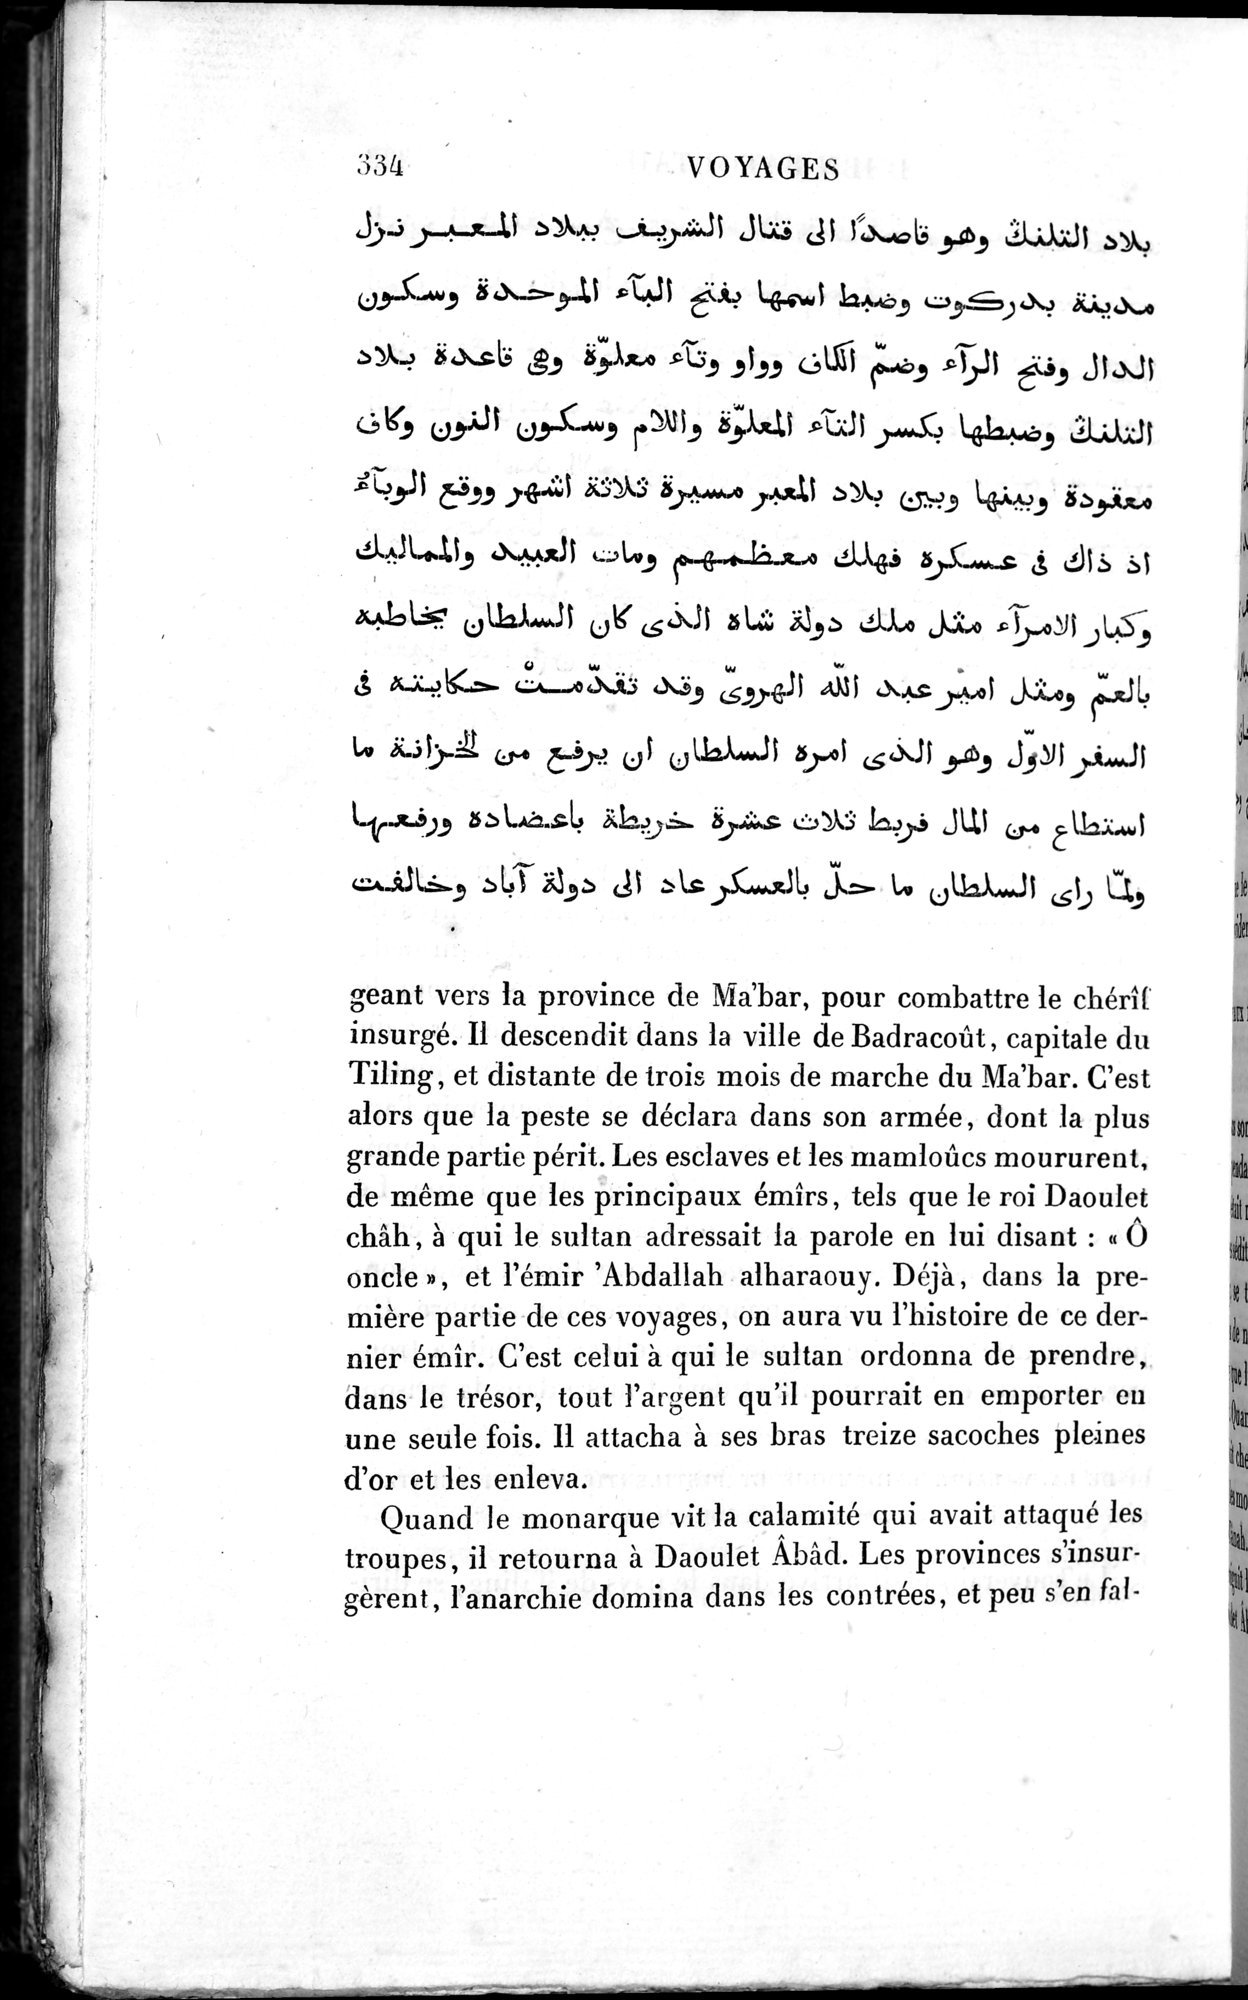 Voyages d'Ibn Batoutah : vol.3 / Page 374 (Grayscale High Resolution Image)